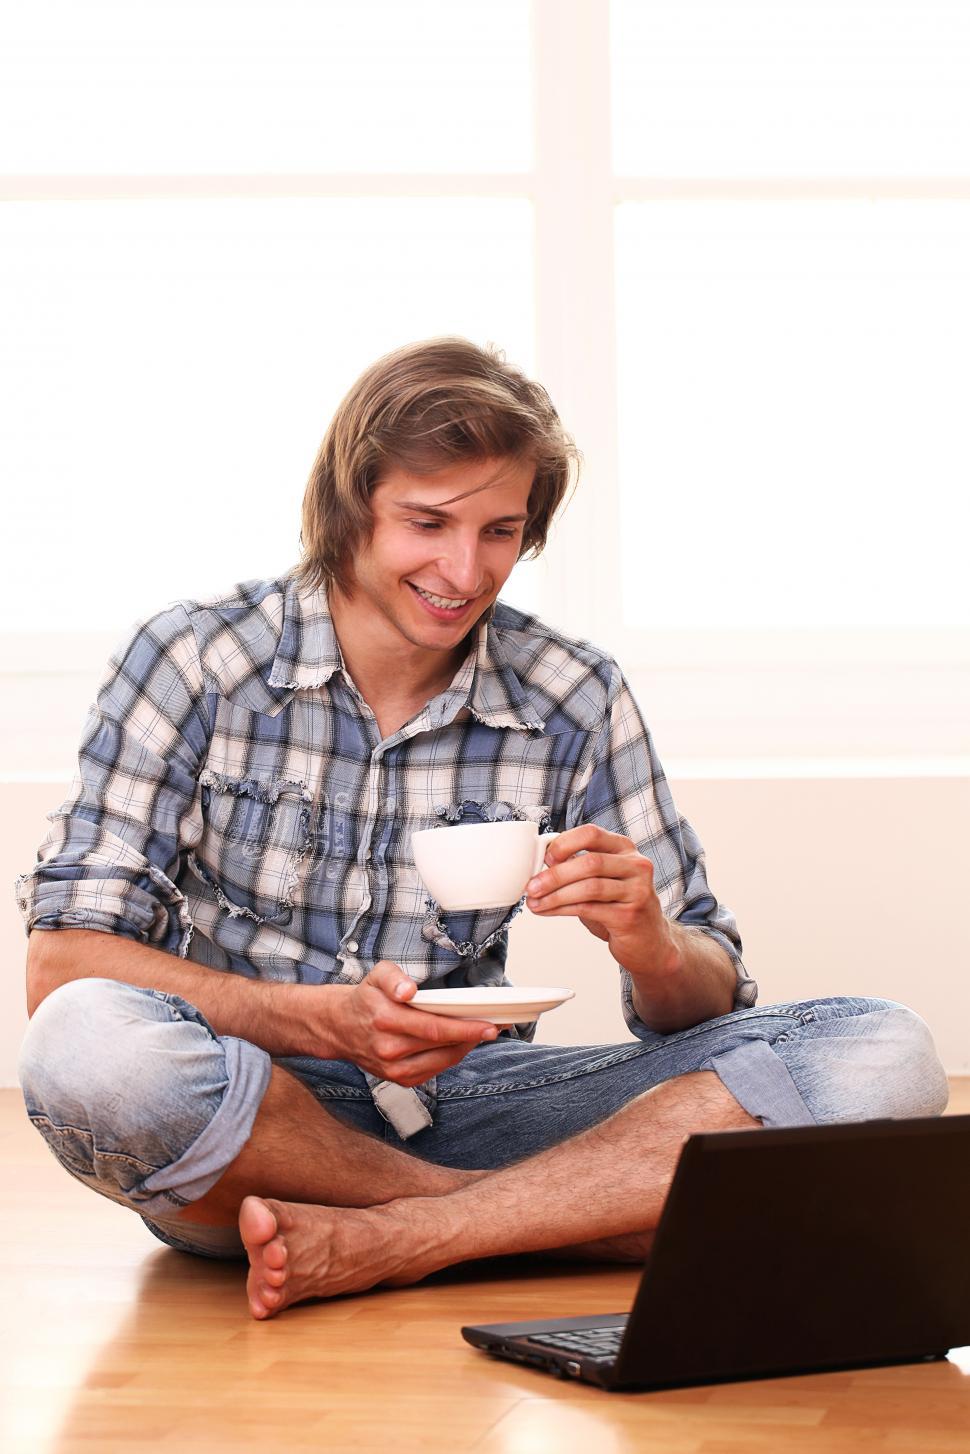 Free Image of Handsome guy with a cup of coffee and laptop 